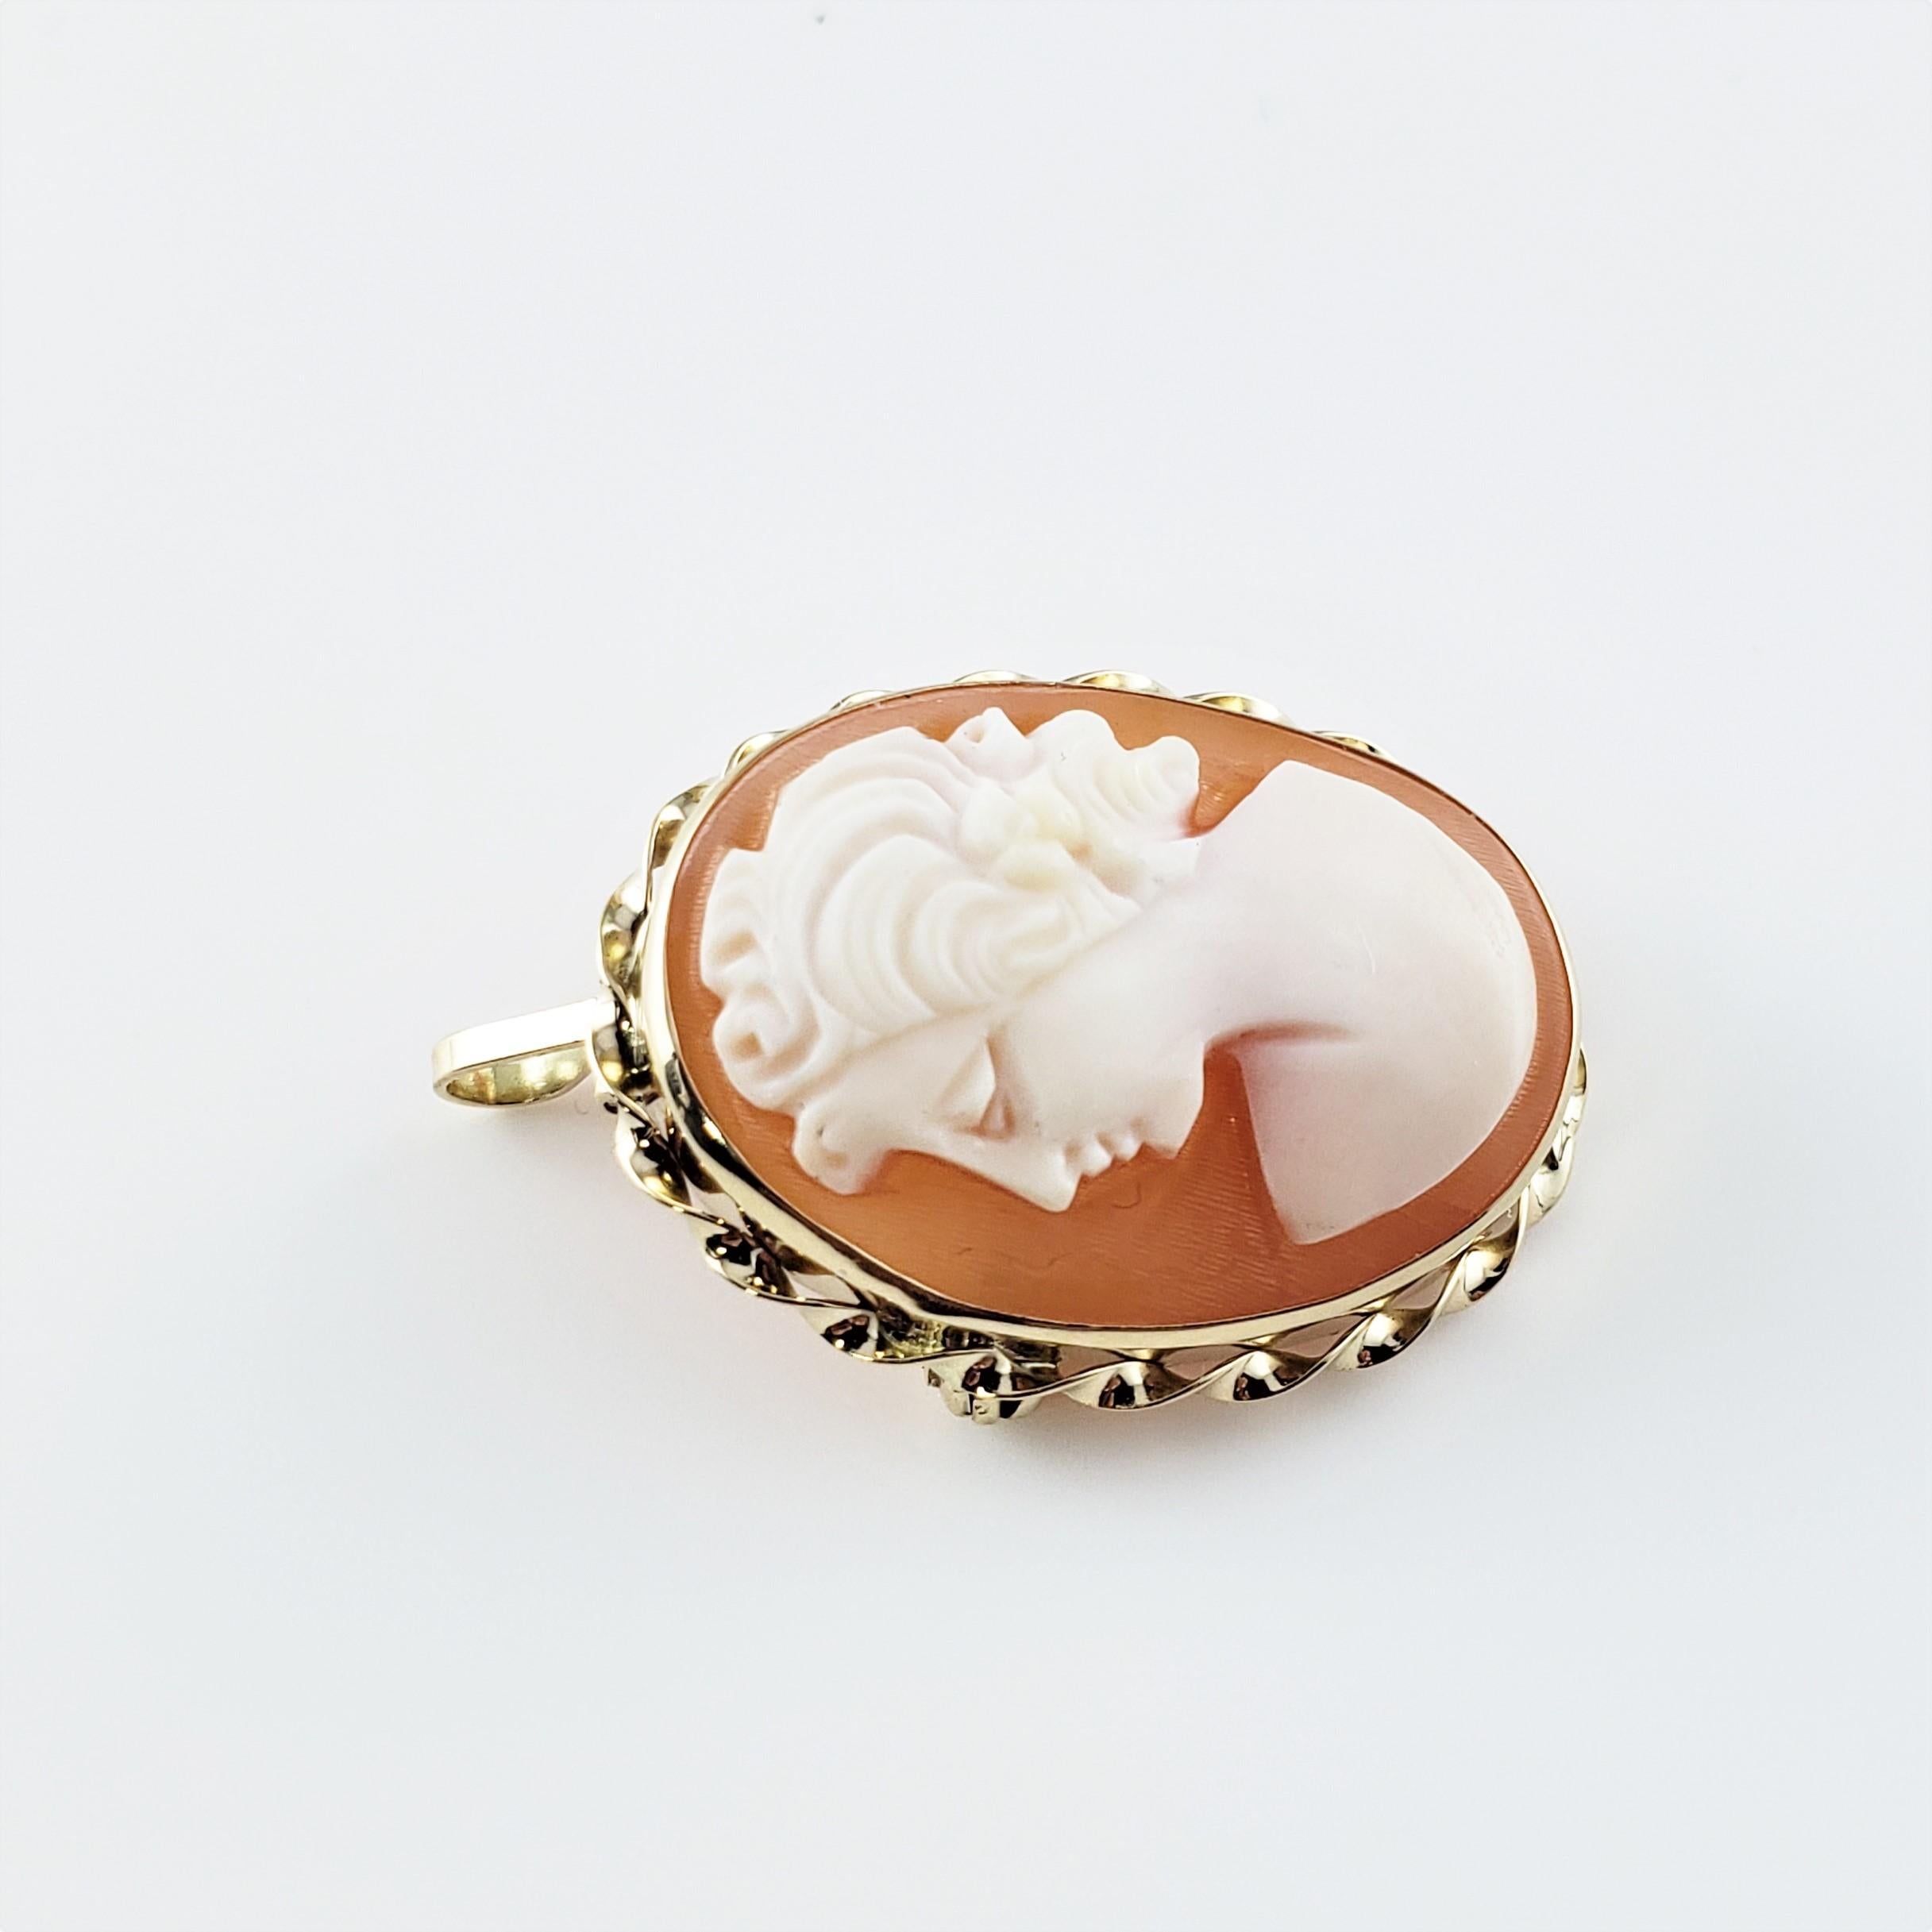 14 Karat Yellow Gold Cameo Brooch/Pendant-

This elegant cameo features a lovely lady in profile framed in beautifully detailed 14K yellow gold.  Can be worn as a brooch or a pendant.

*Chain not included

Size:  22 mm x  17 mm

Weight:  1.7 dwt. /